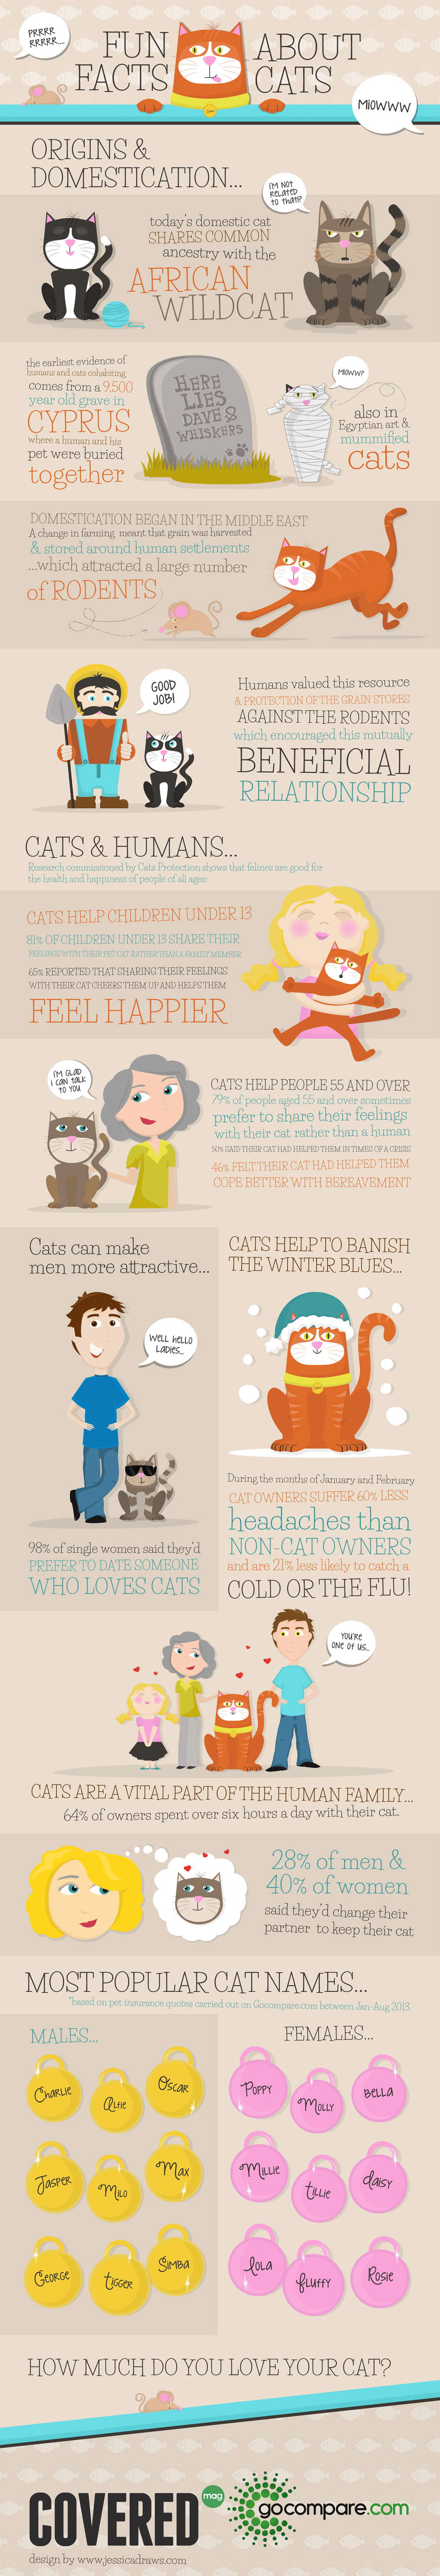 Fun Facts About Cats | Visual.ly